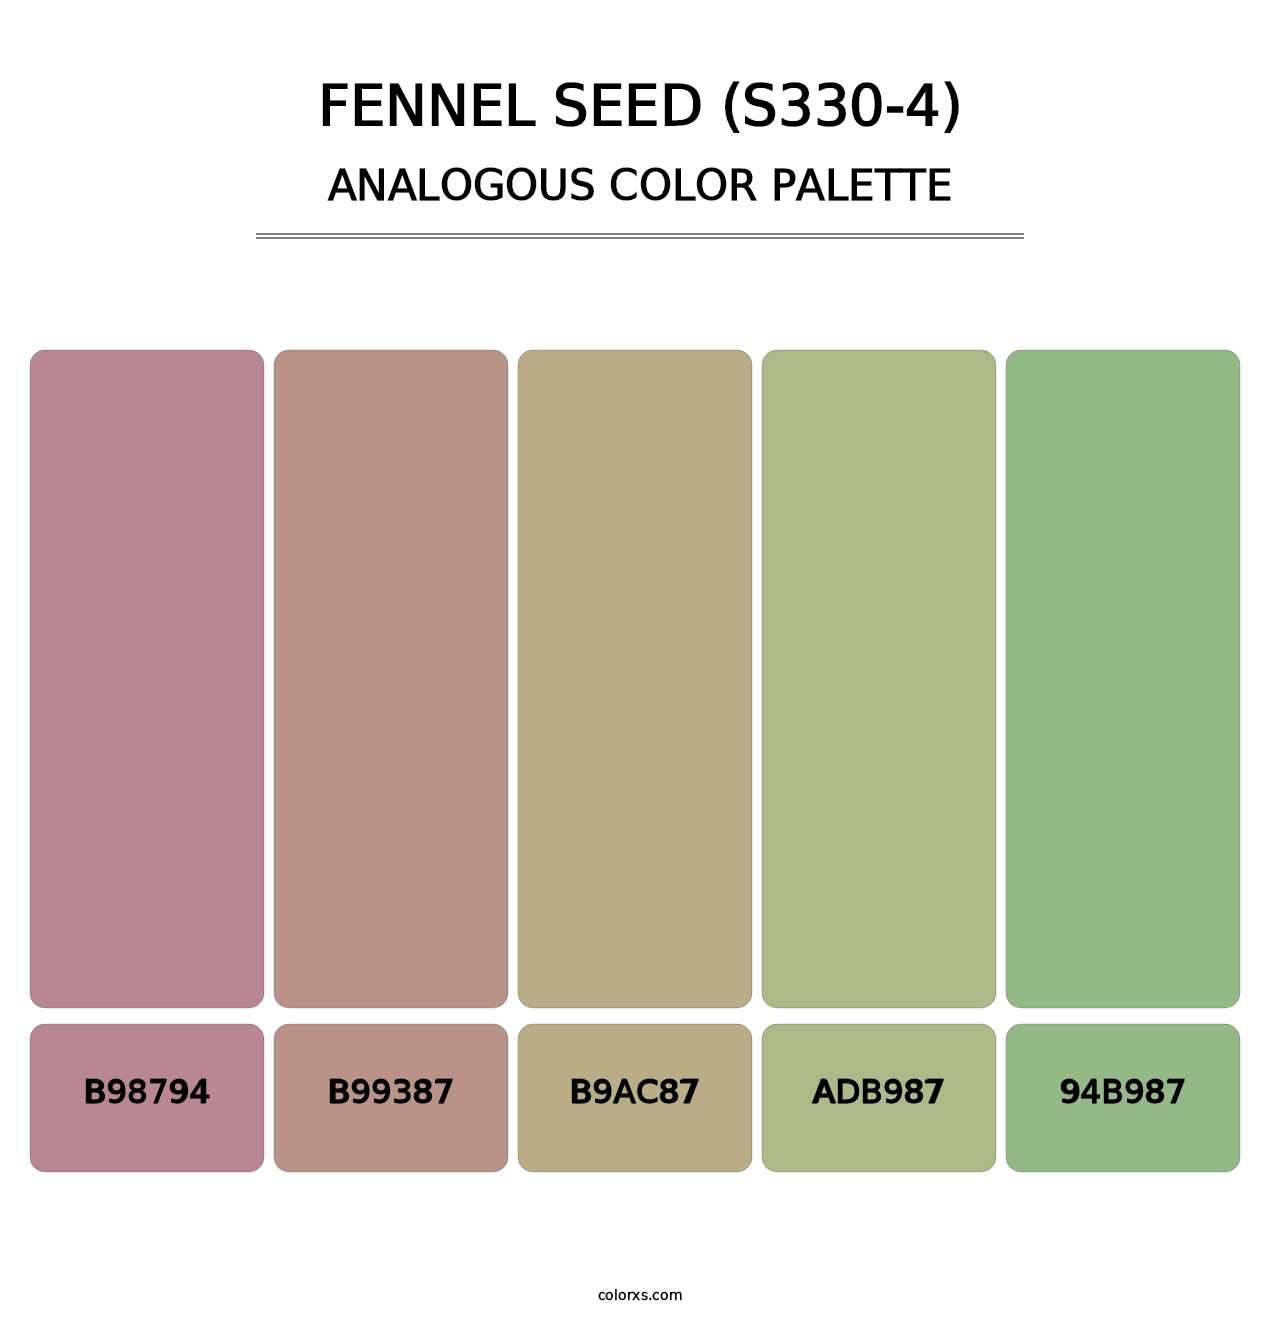 Fennel Seed (S330-4) - Analogous Color Palette